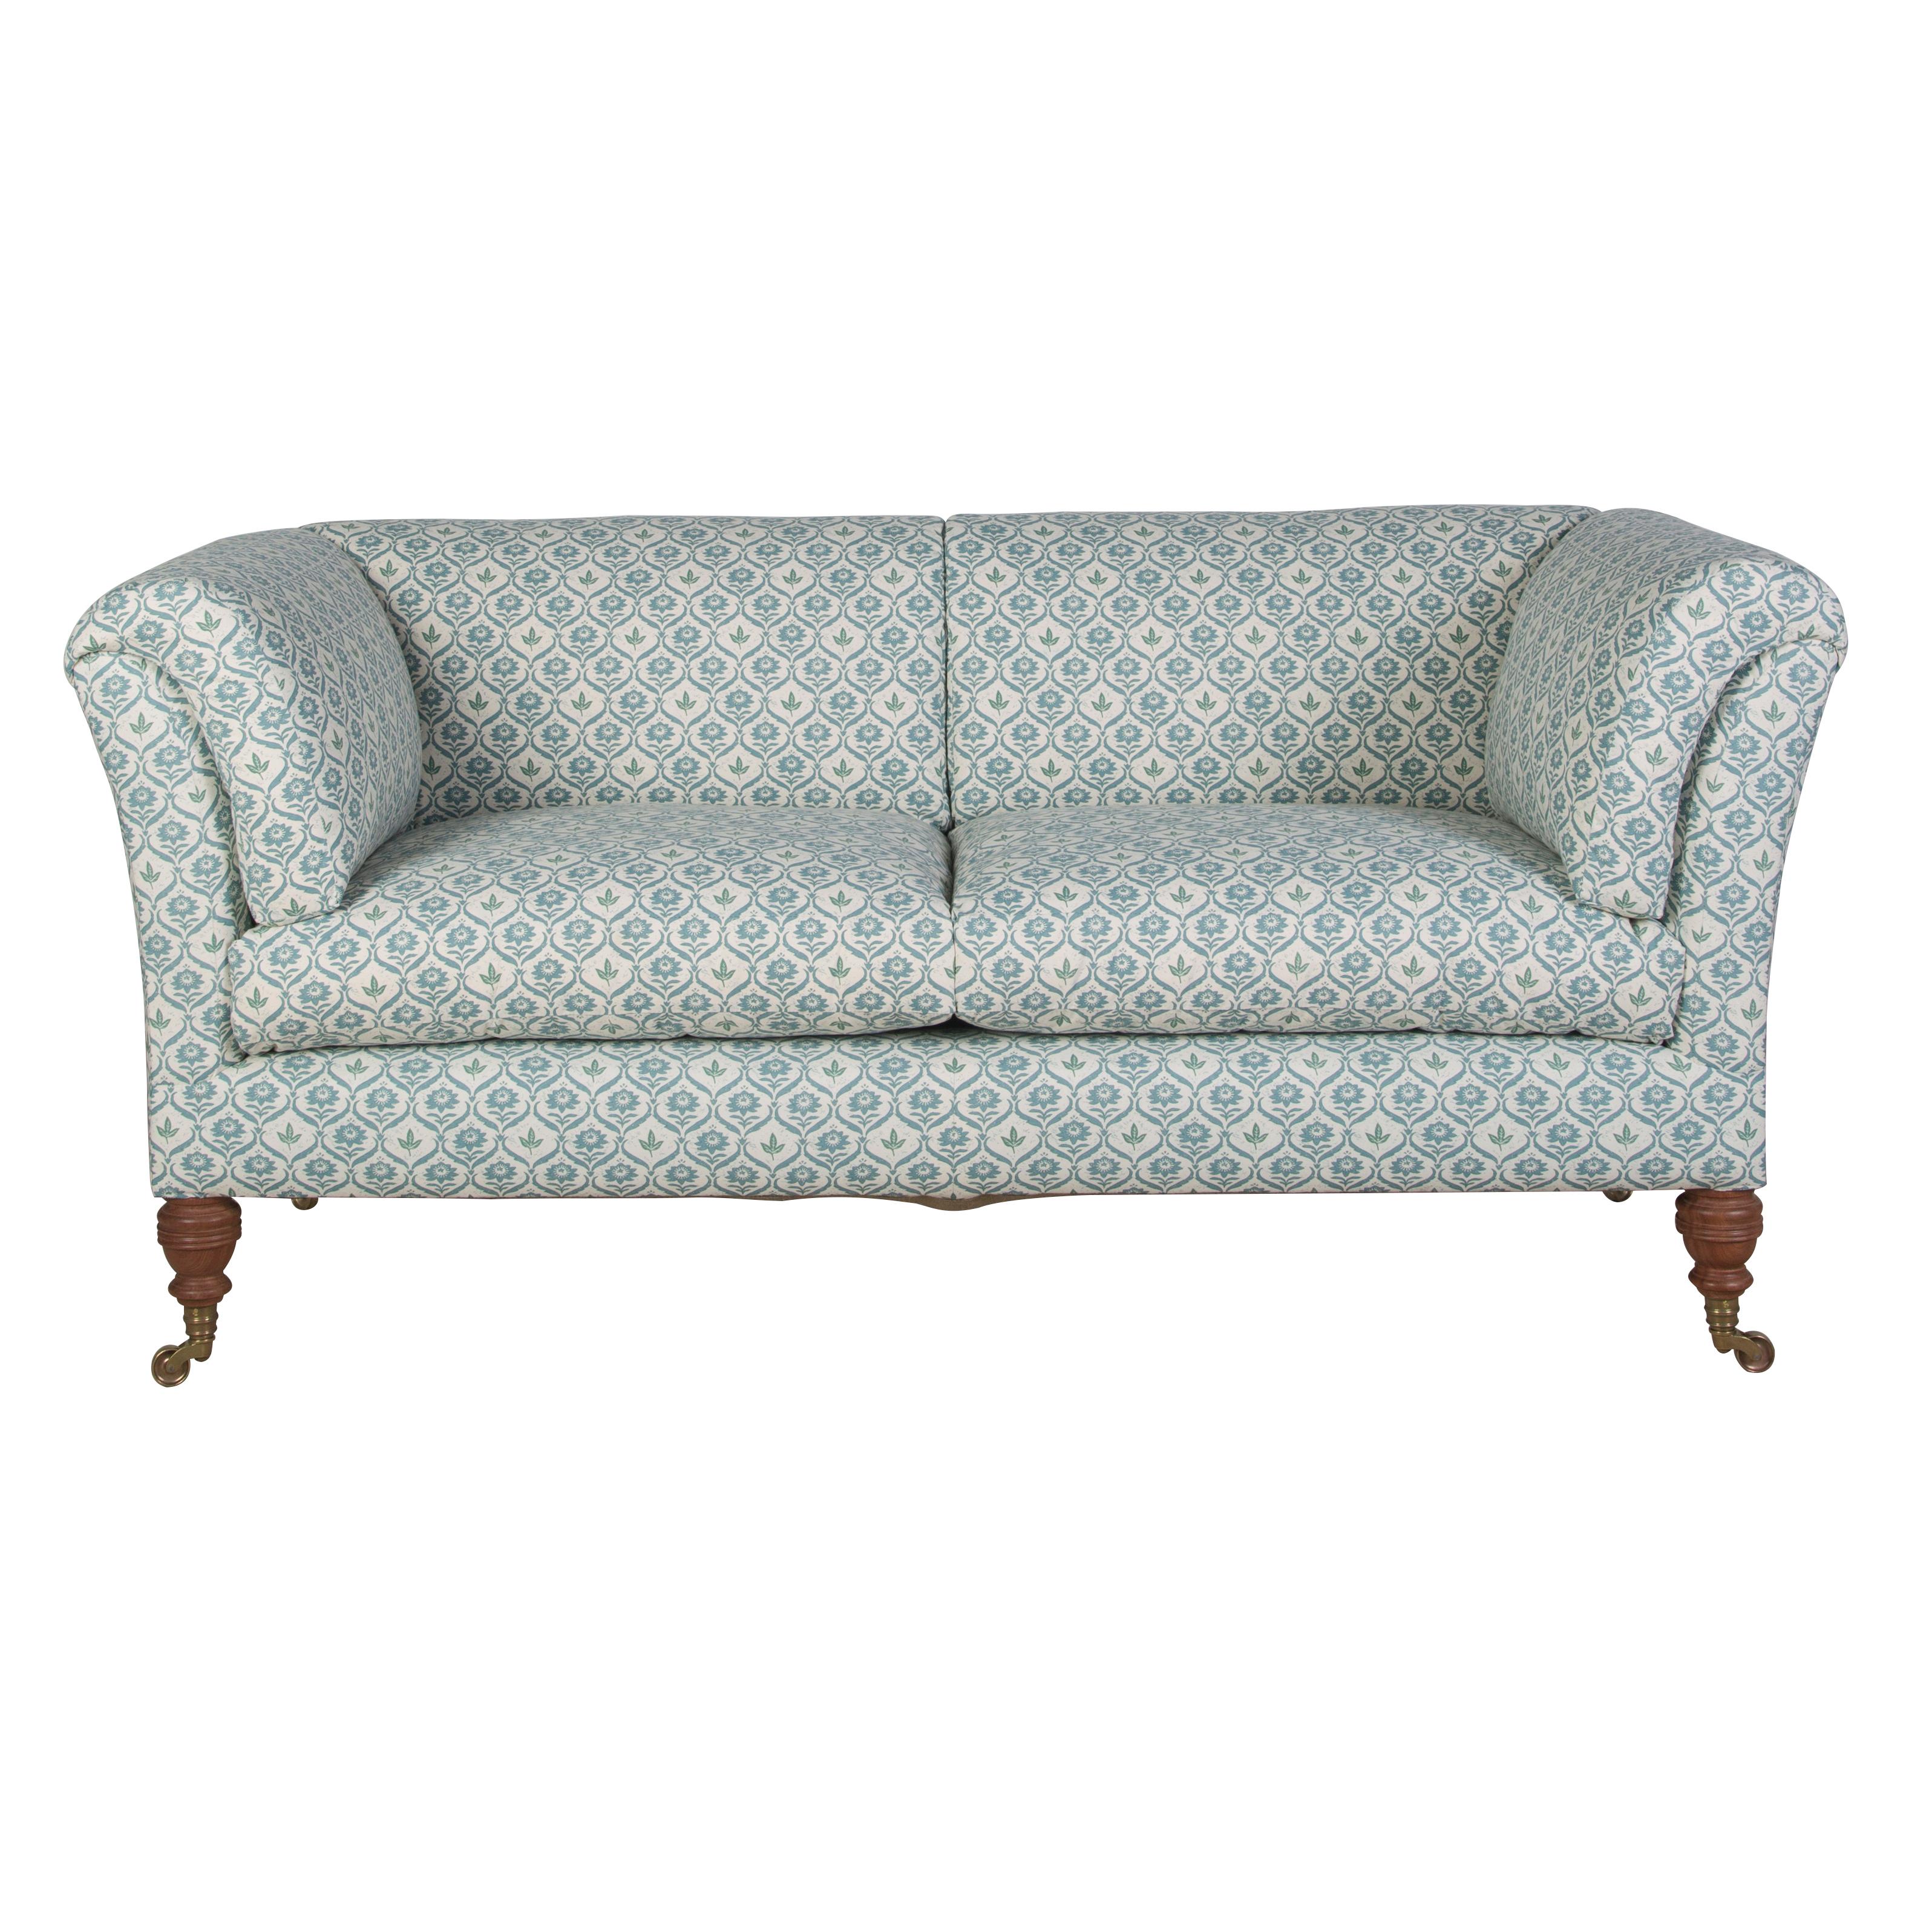 Upholstery The Belmont Sofa For Sale